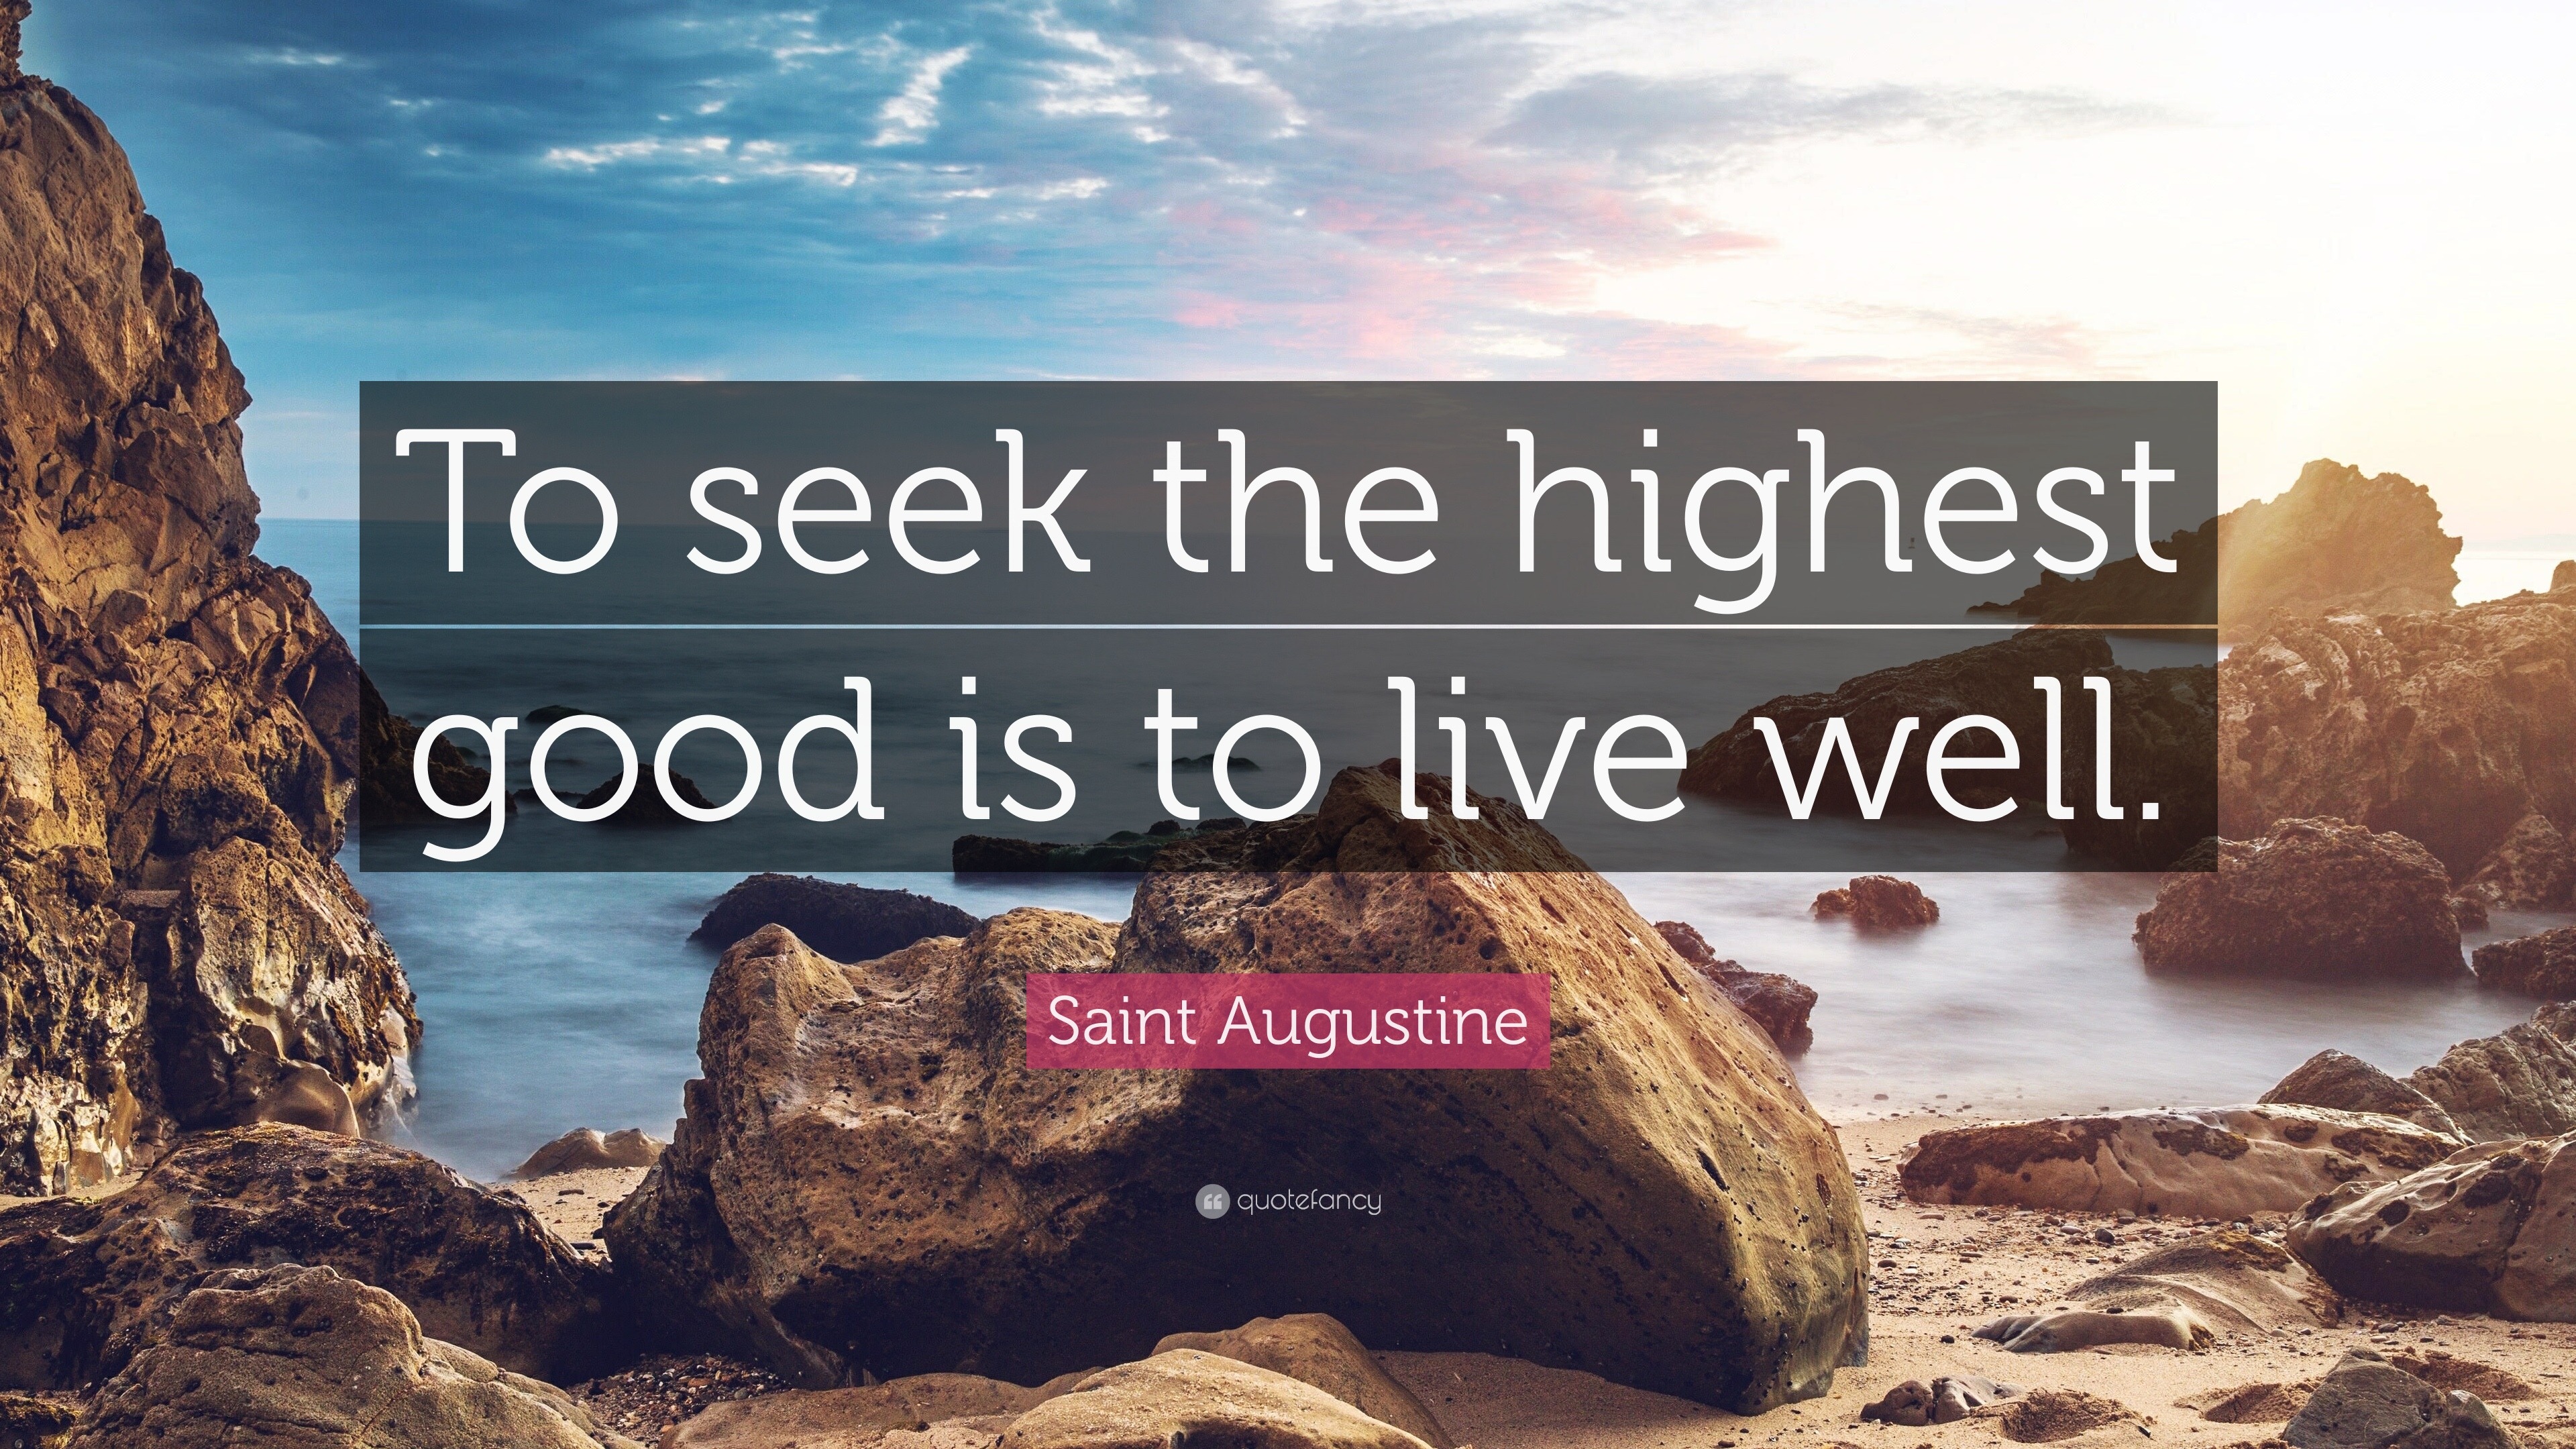 https://quotefancy.com/media/wallpaper/3840x2160/1812688-Saint-Augustine-Quote-To-seek-the-highest-good-is-to-live-well.jpg